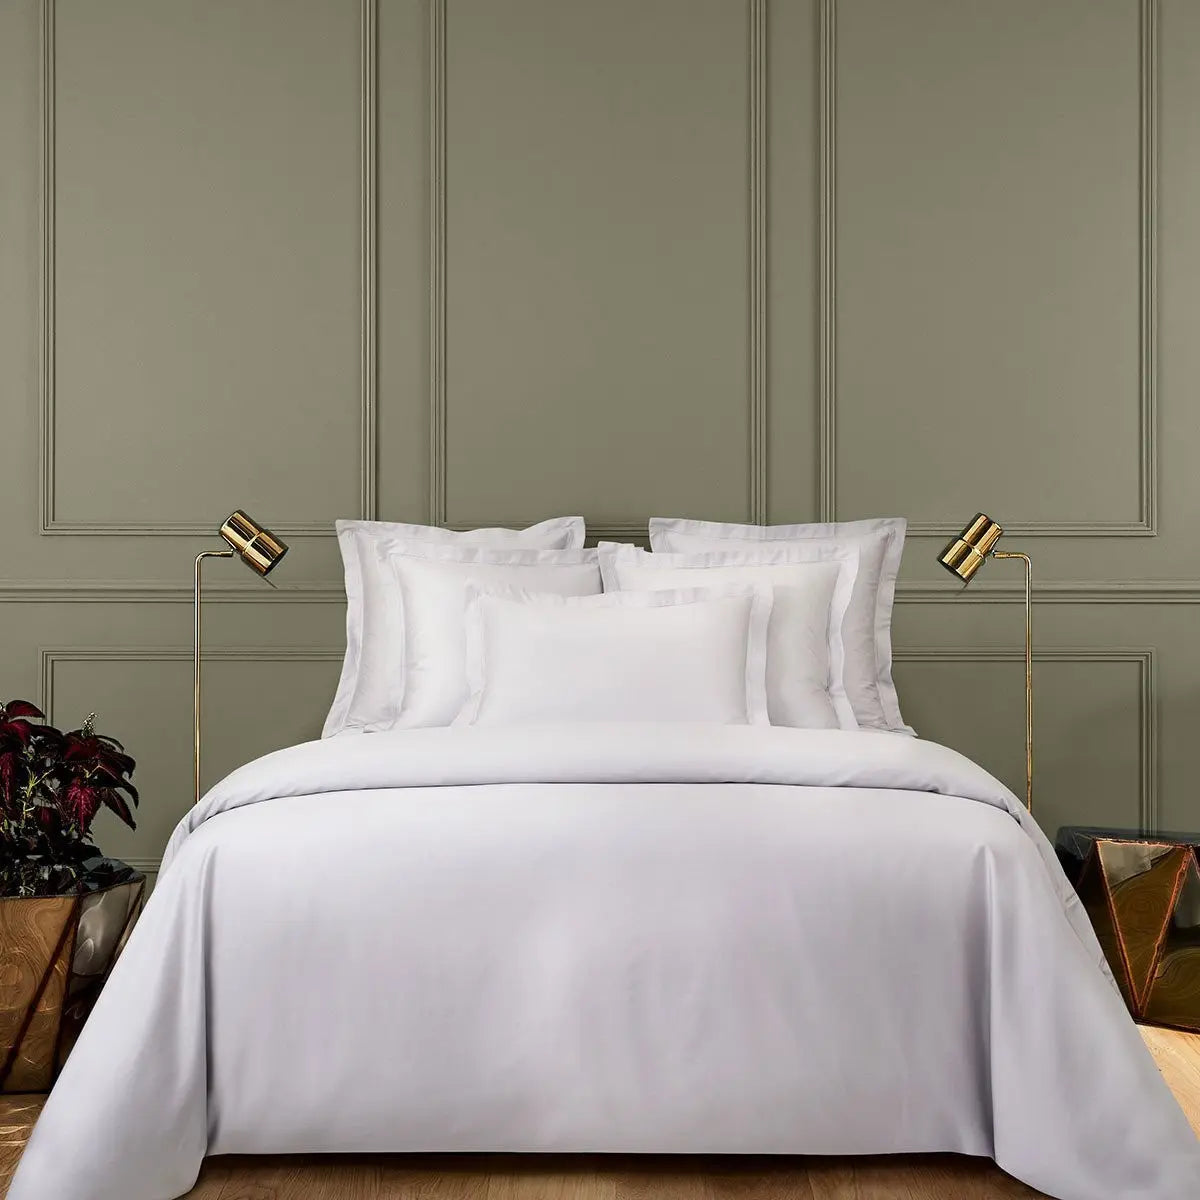 Yves Delorme Triomphe Bedding Collection in Silver in a room